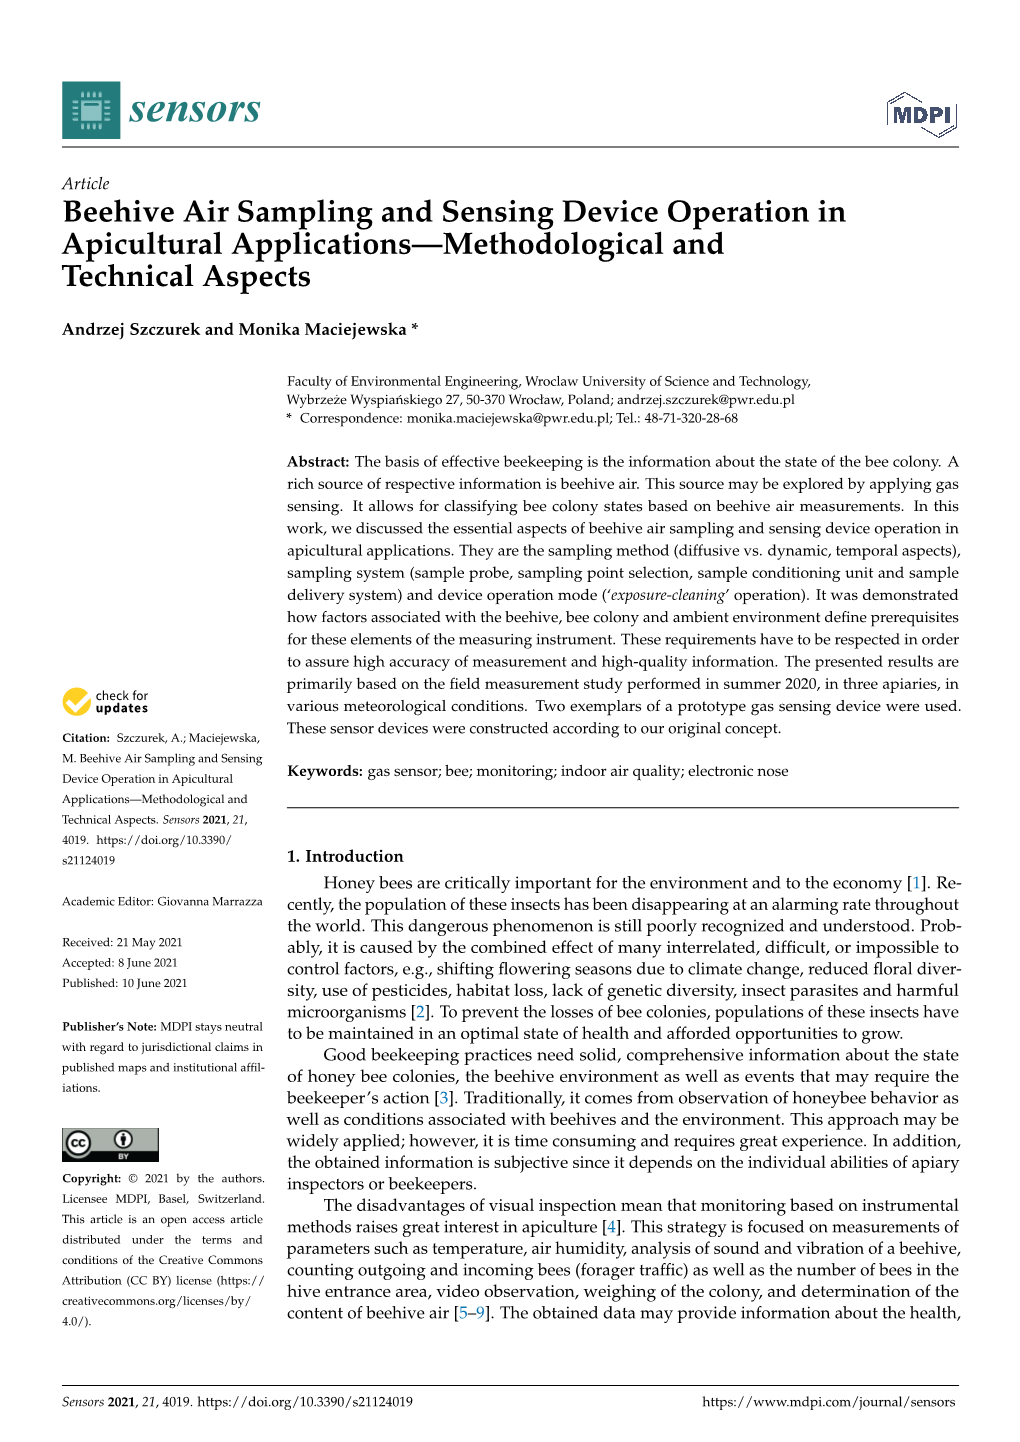 Beehive Air Sampling and Sensing Device Operation in Apicultural Applications—Methodological and Technical Aspects